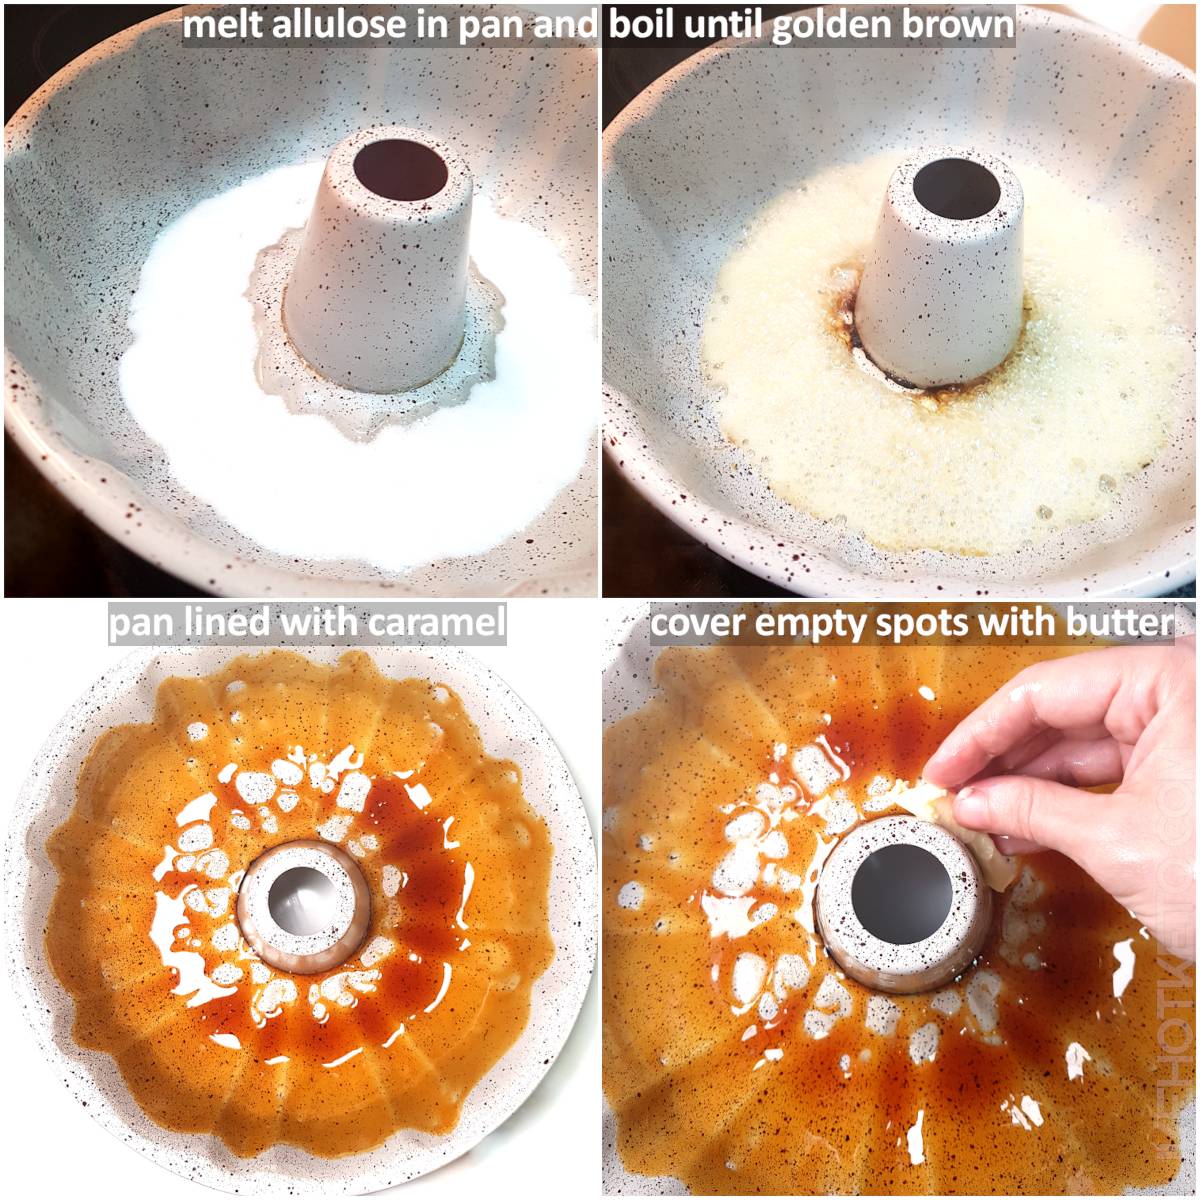 Collage of pictures showing the allulose melting into caramel, lining of the tube pan and greasing with butter.